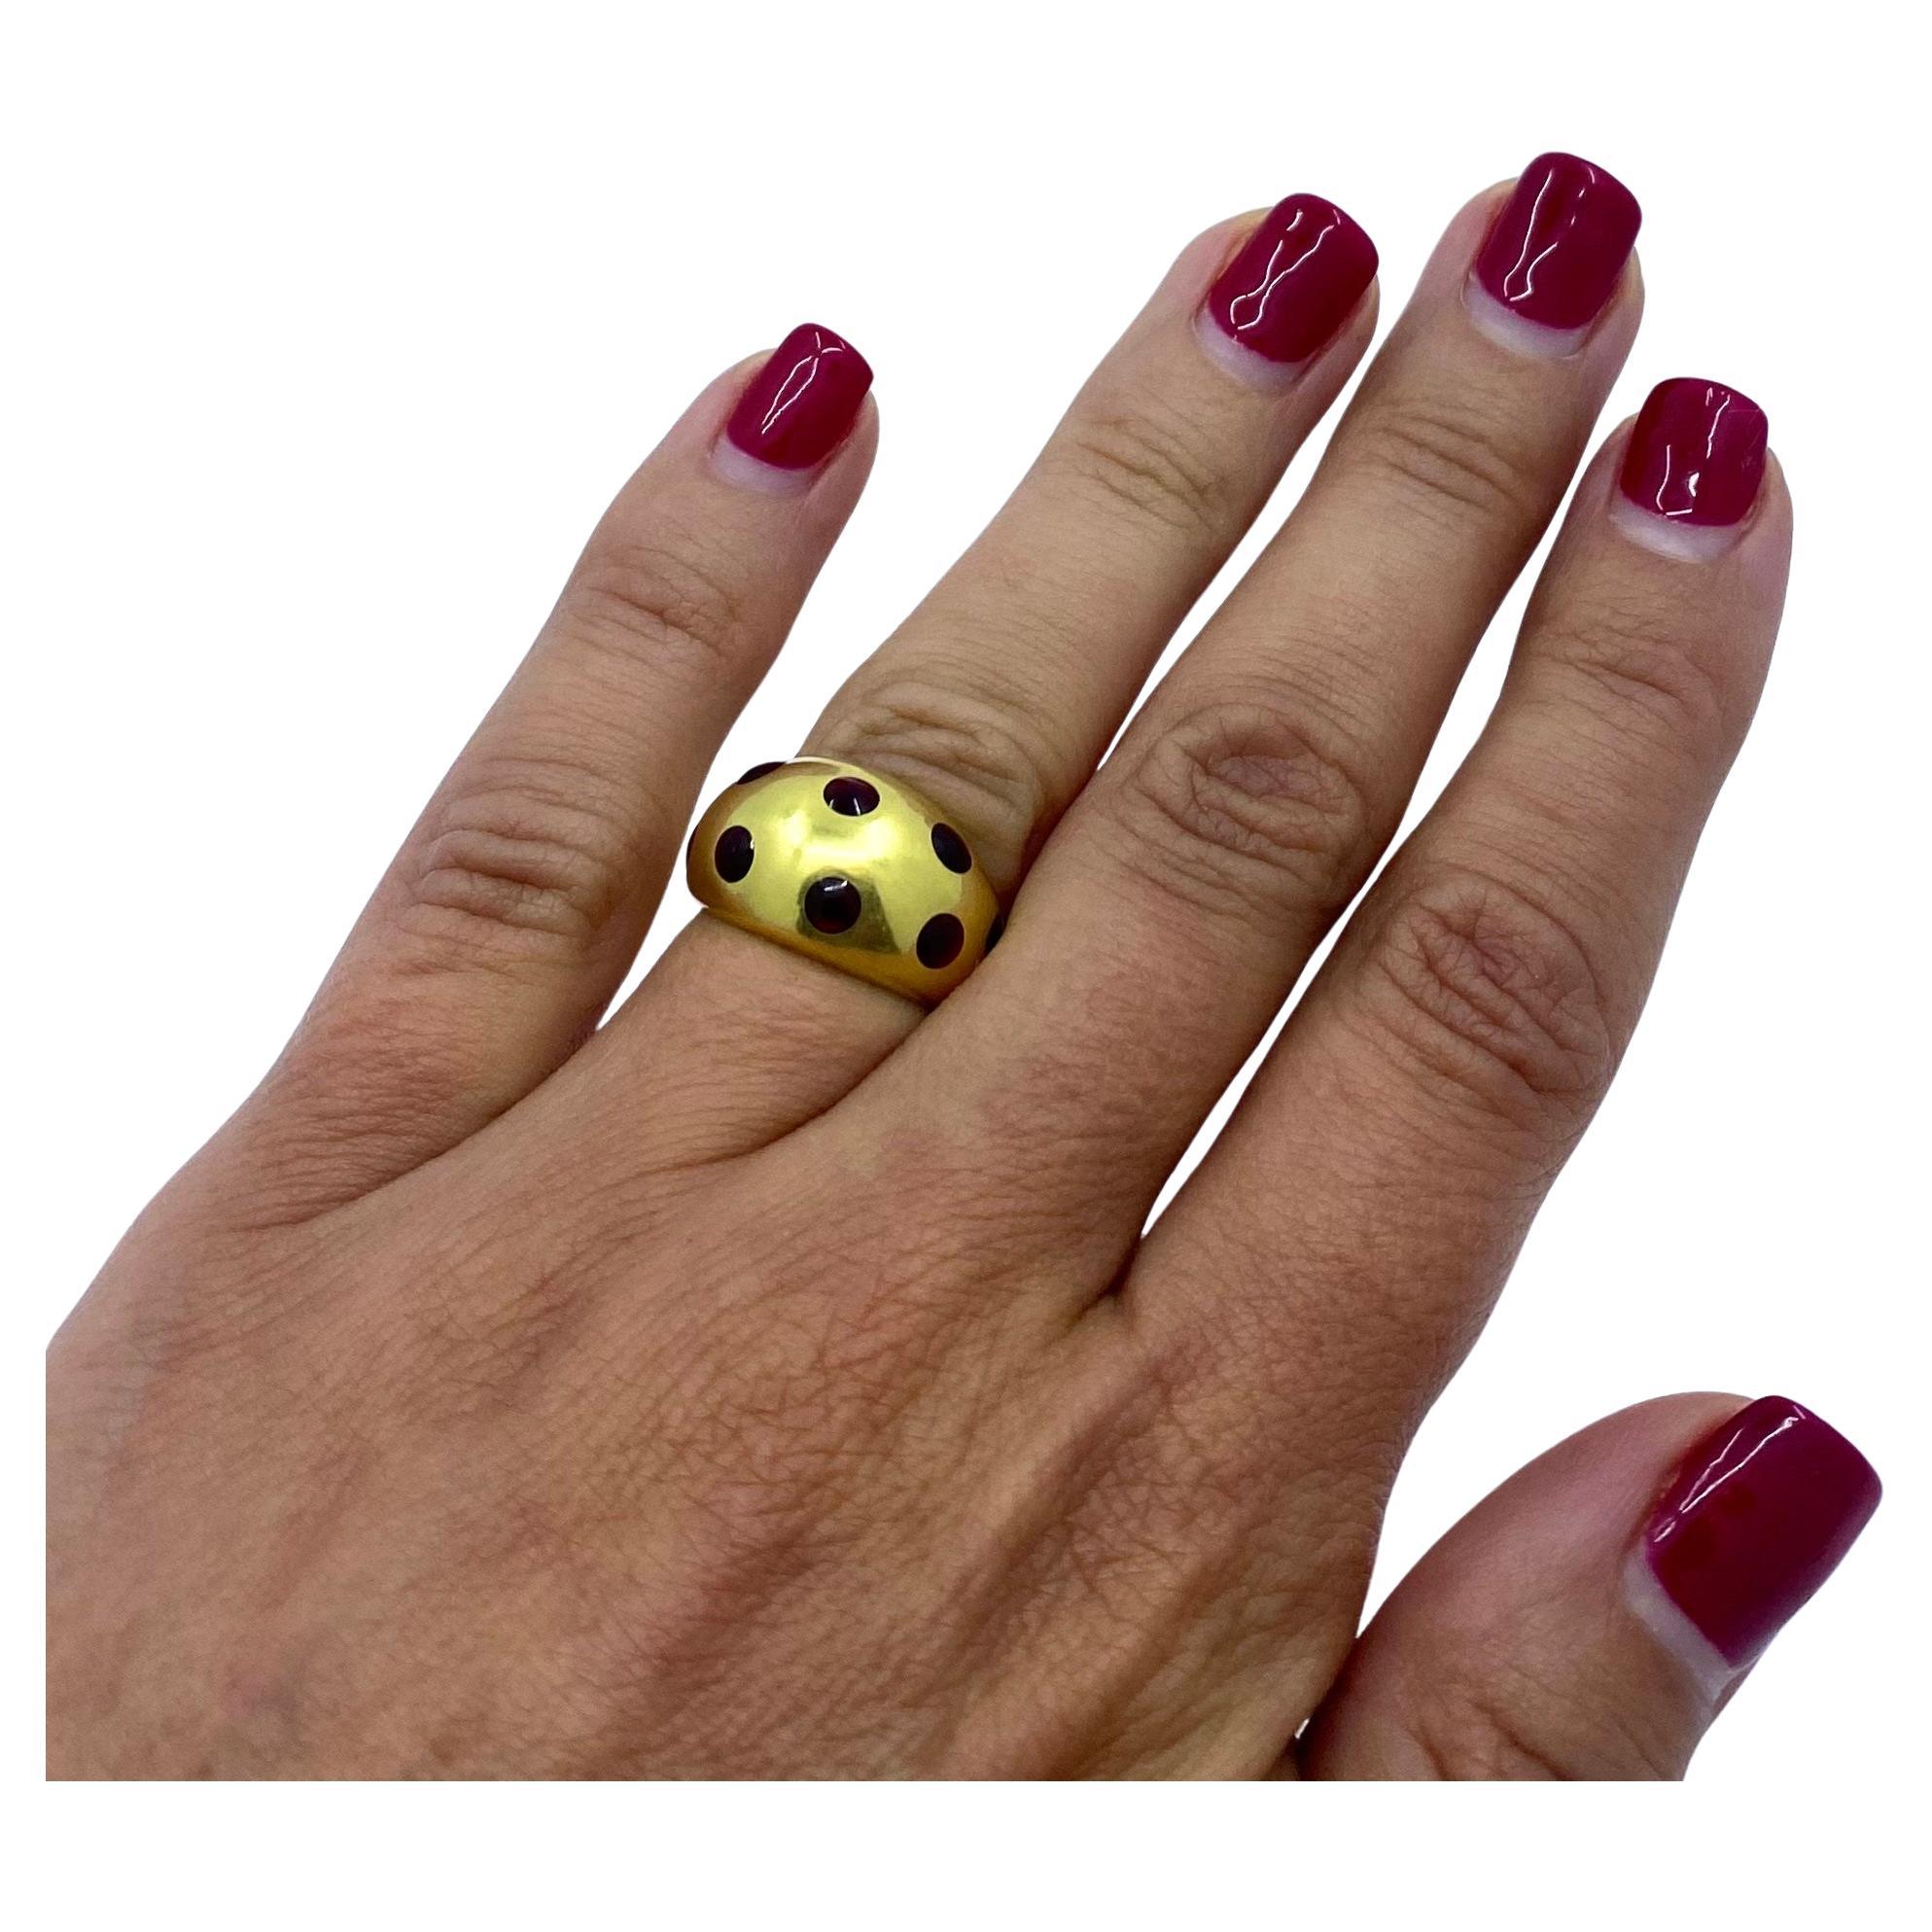 
A vintage dome ring by Van Cleef & Arpels, made of 18k gold, features enamel. The enamel drops are mount-flush set into the gold which creates a fun polka dot pattern on the ring. Along with the dome shape, it conveys a sweet, yet elegance feel for